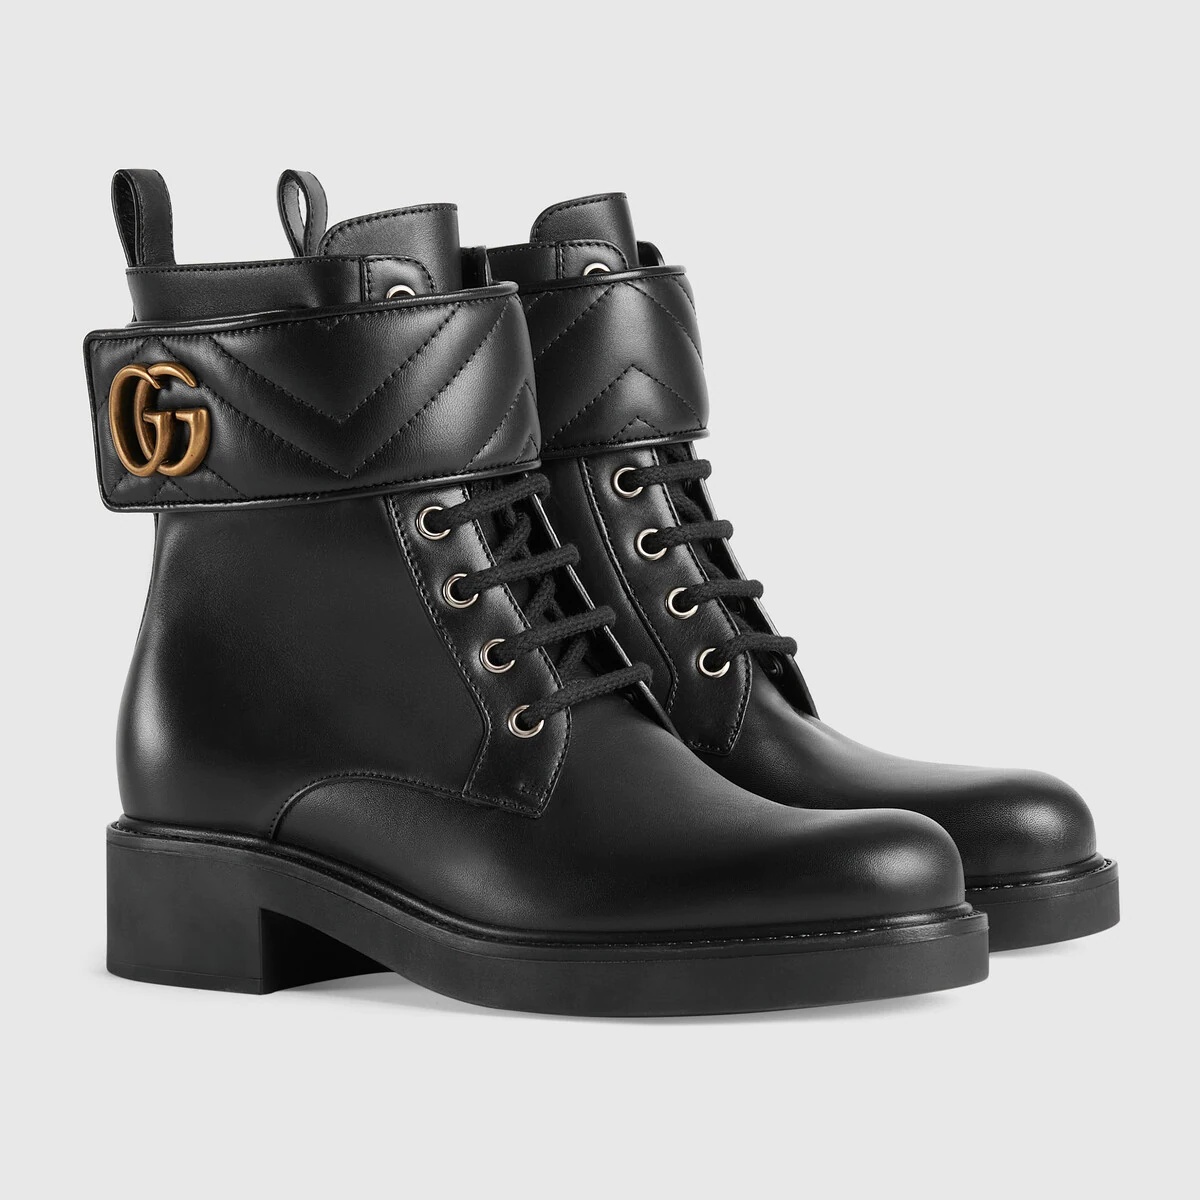 Women's ankle boot with Double G - 2